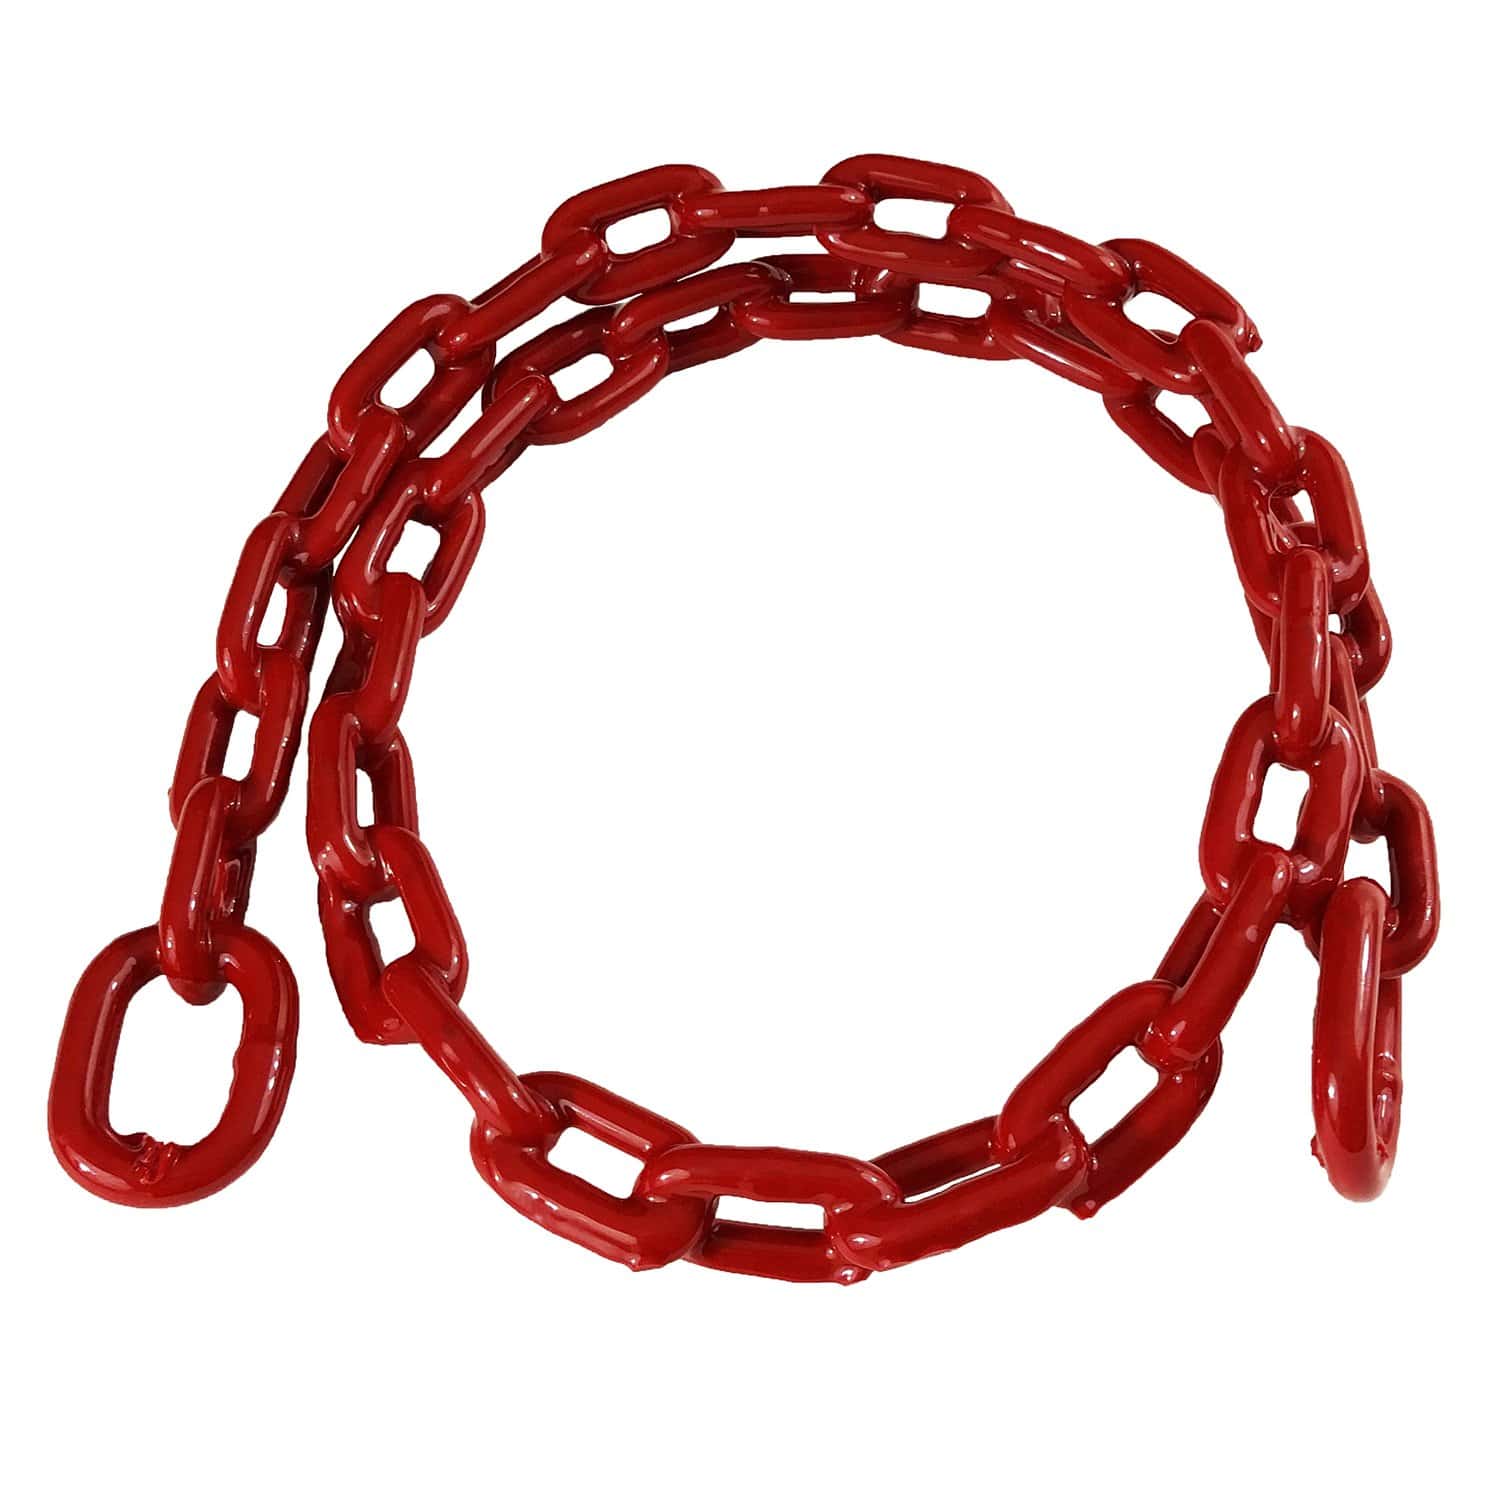 Greenfield 2115-RD PVC Coated Anchor Chain Red